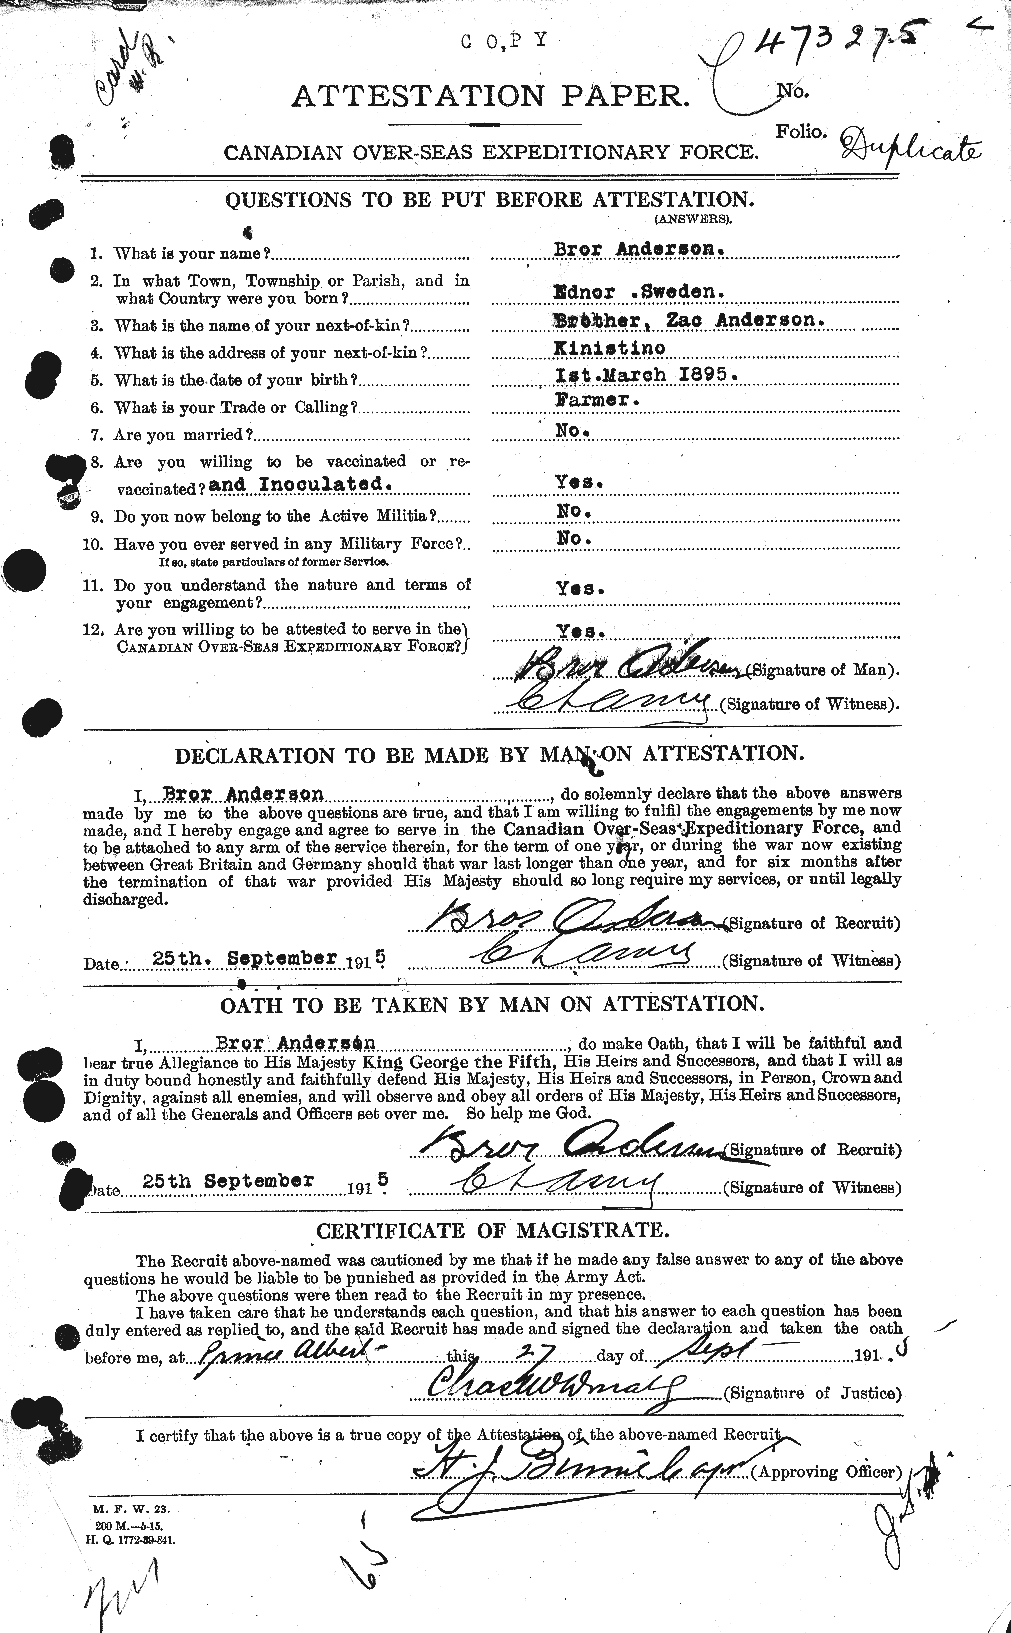 Personnel Records of the First World War - CEF 209307a